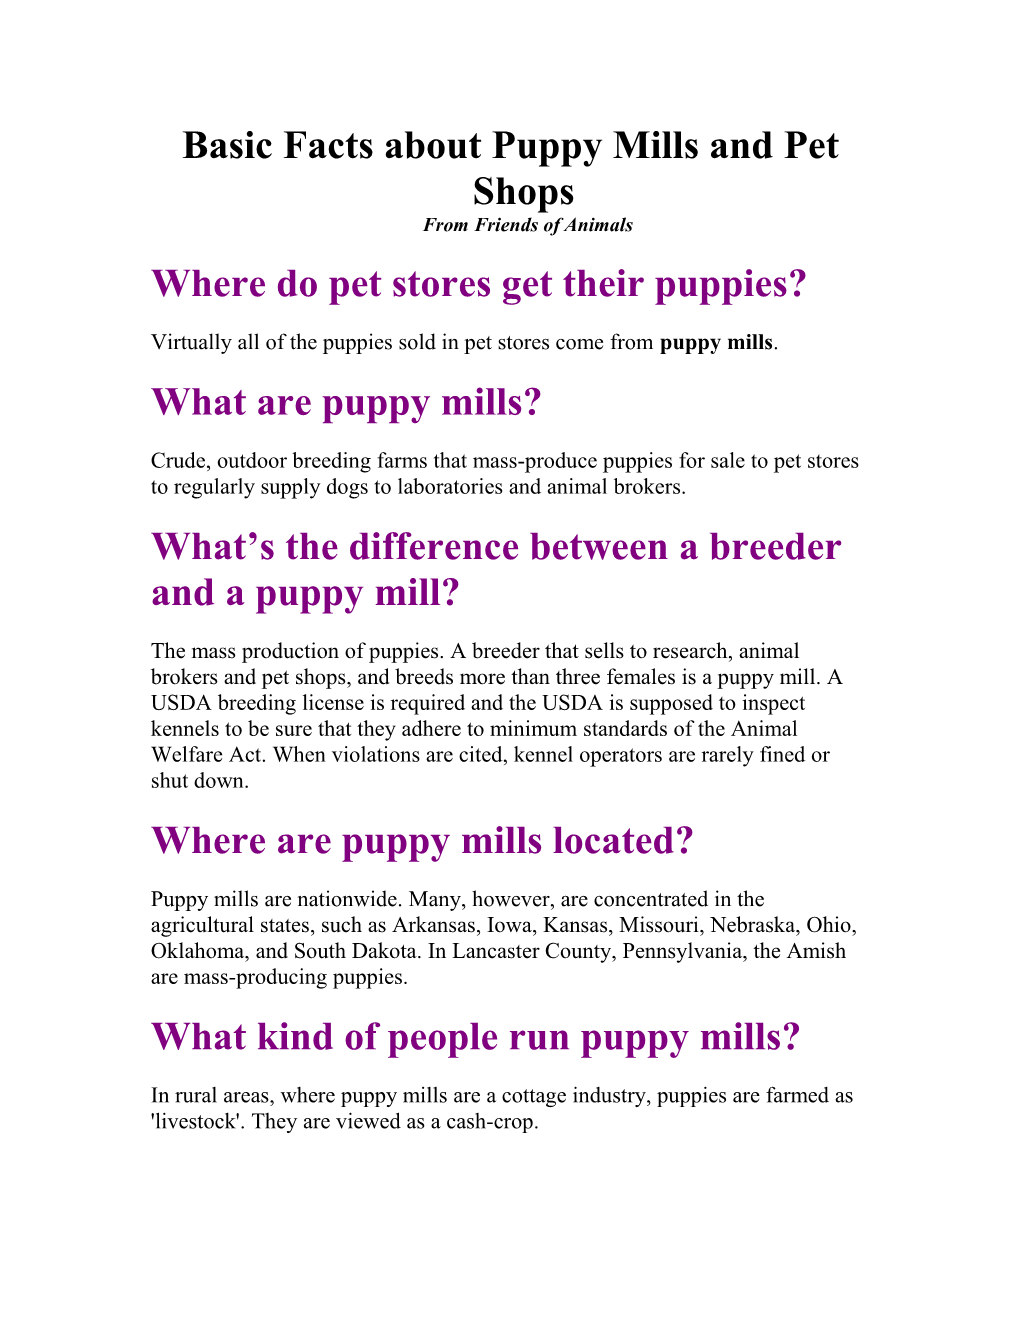 Basic Facts About Puppy Mills and Pet Shops